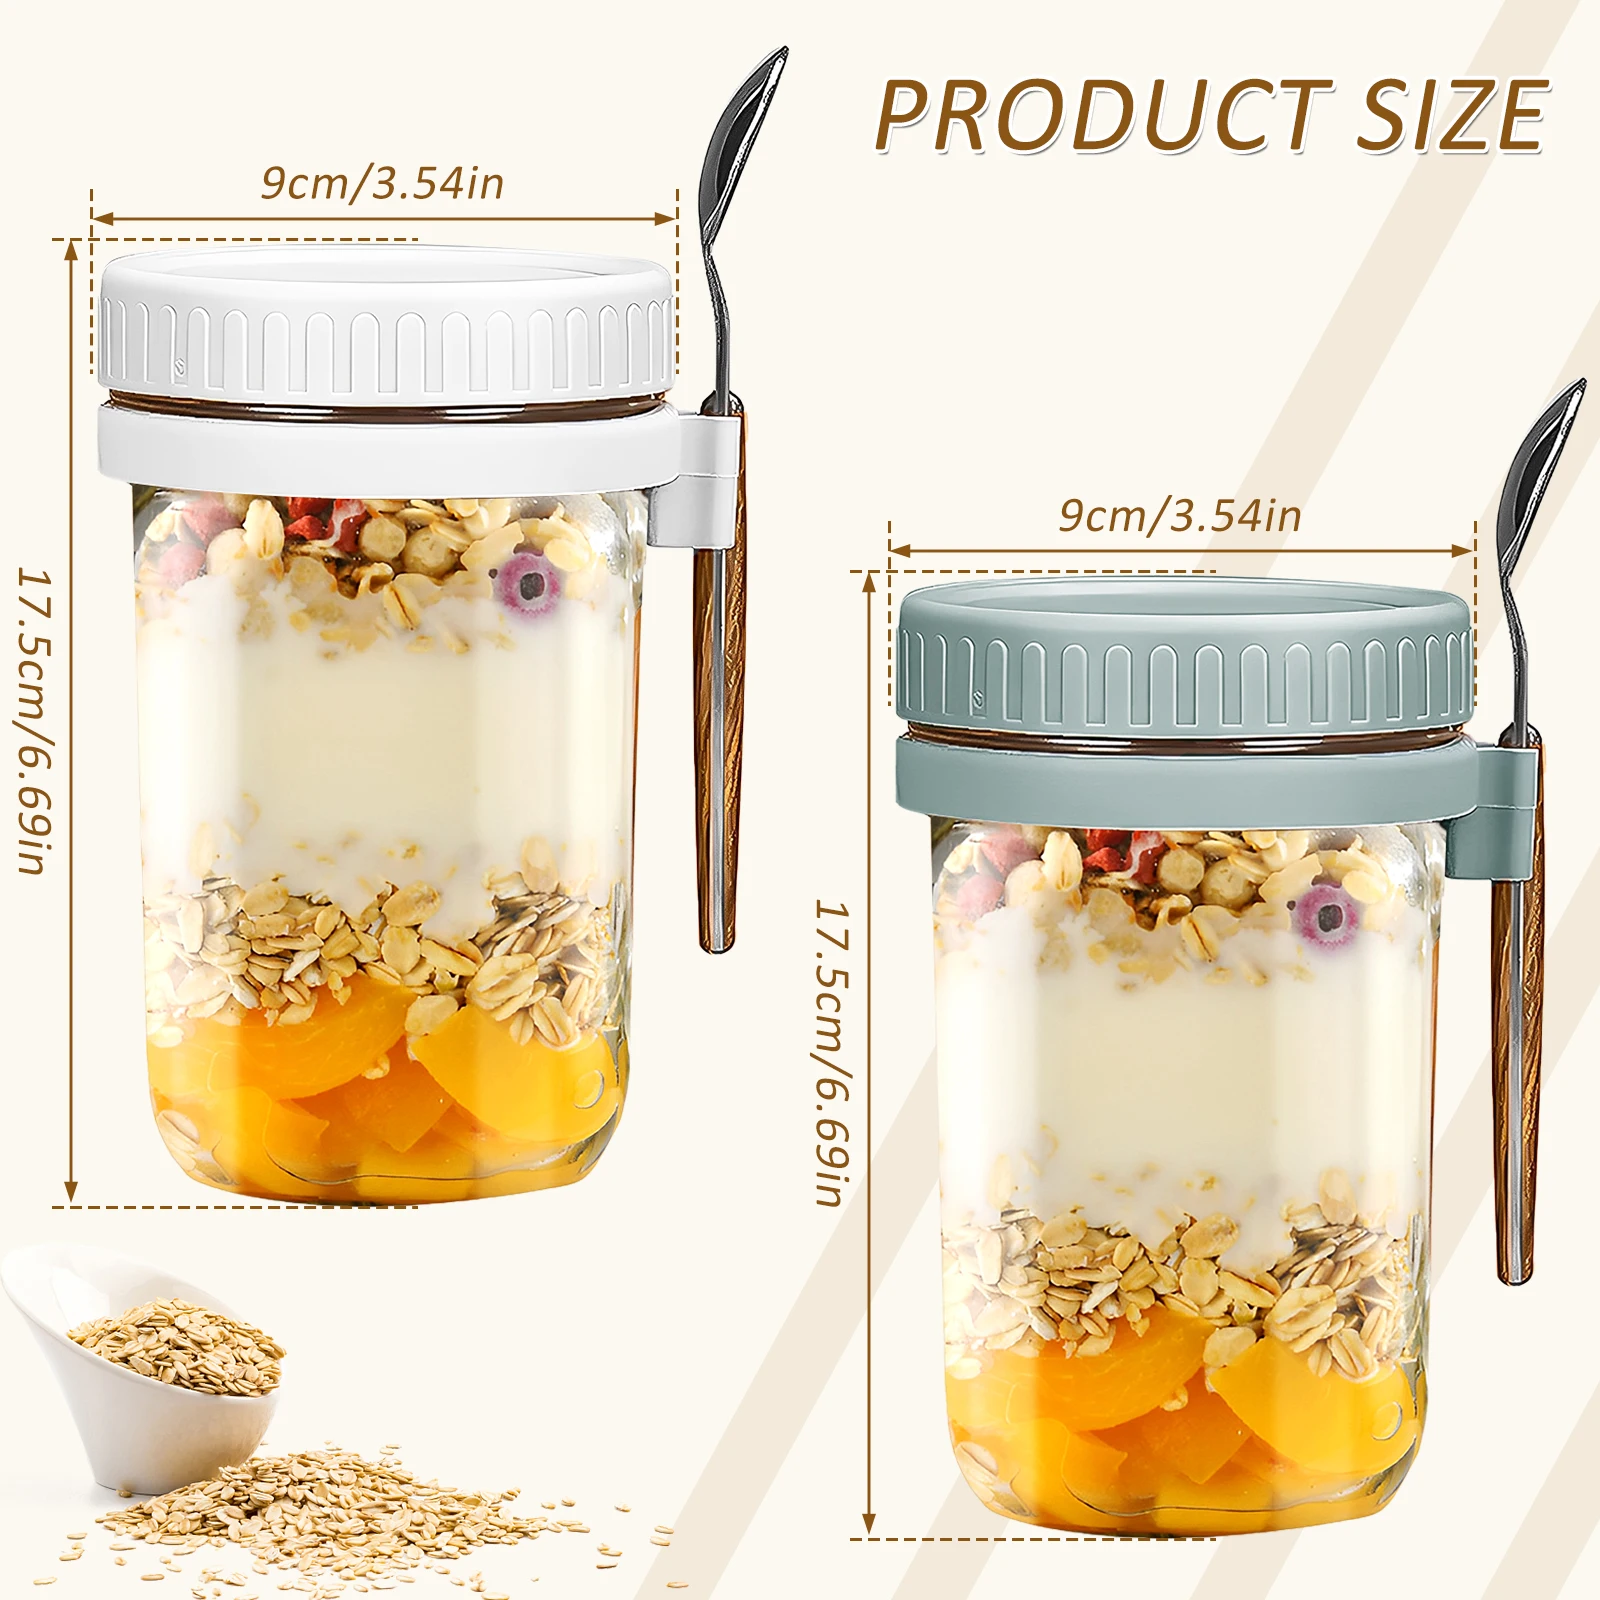 https://ae01.alicdn.com/kf/S59b9d61ccf924cc79076b5e74fff0ab6i/2Pcs-Overnight-Oats-Container-with-Lid-and-Stainless-Steel-Spoon-20oz-Overnight-Oats-Jars-Leakproof-Overnight.jpg